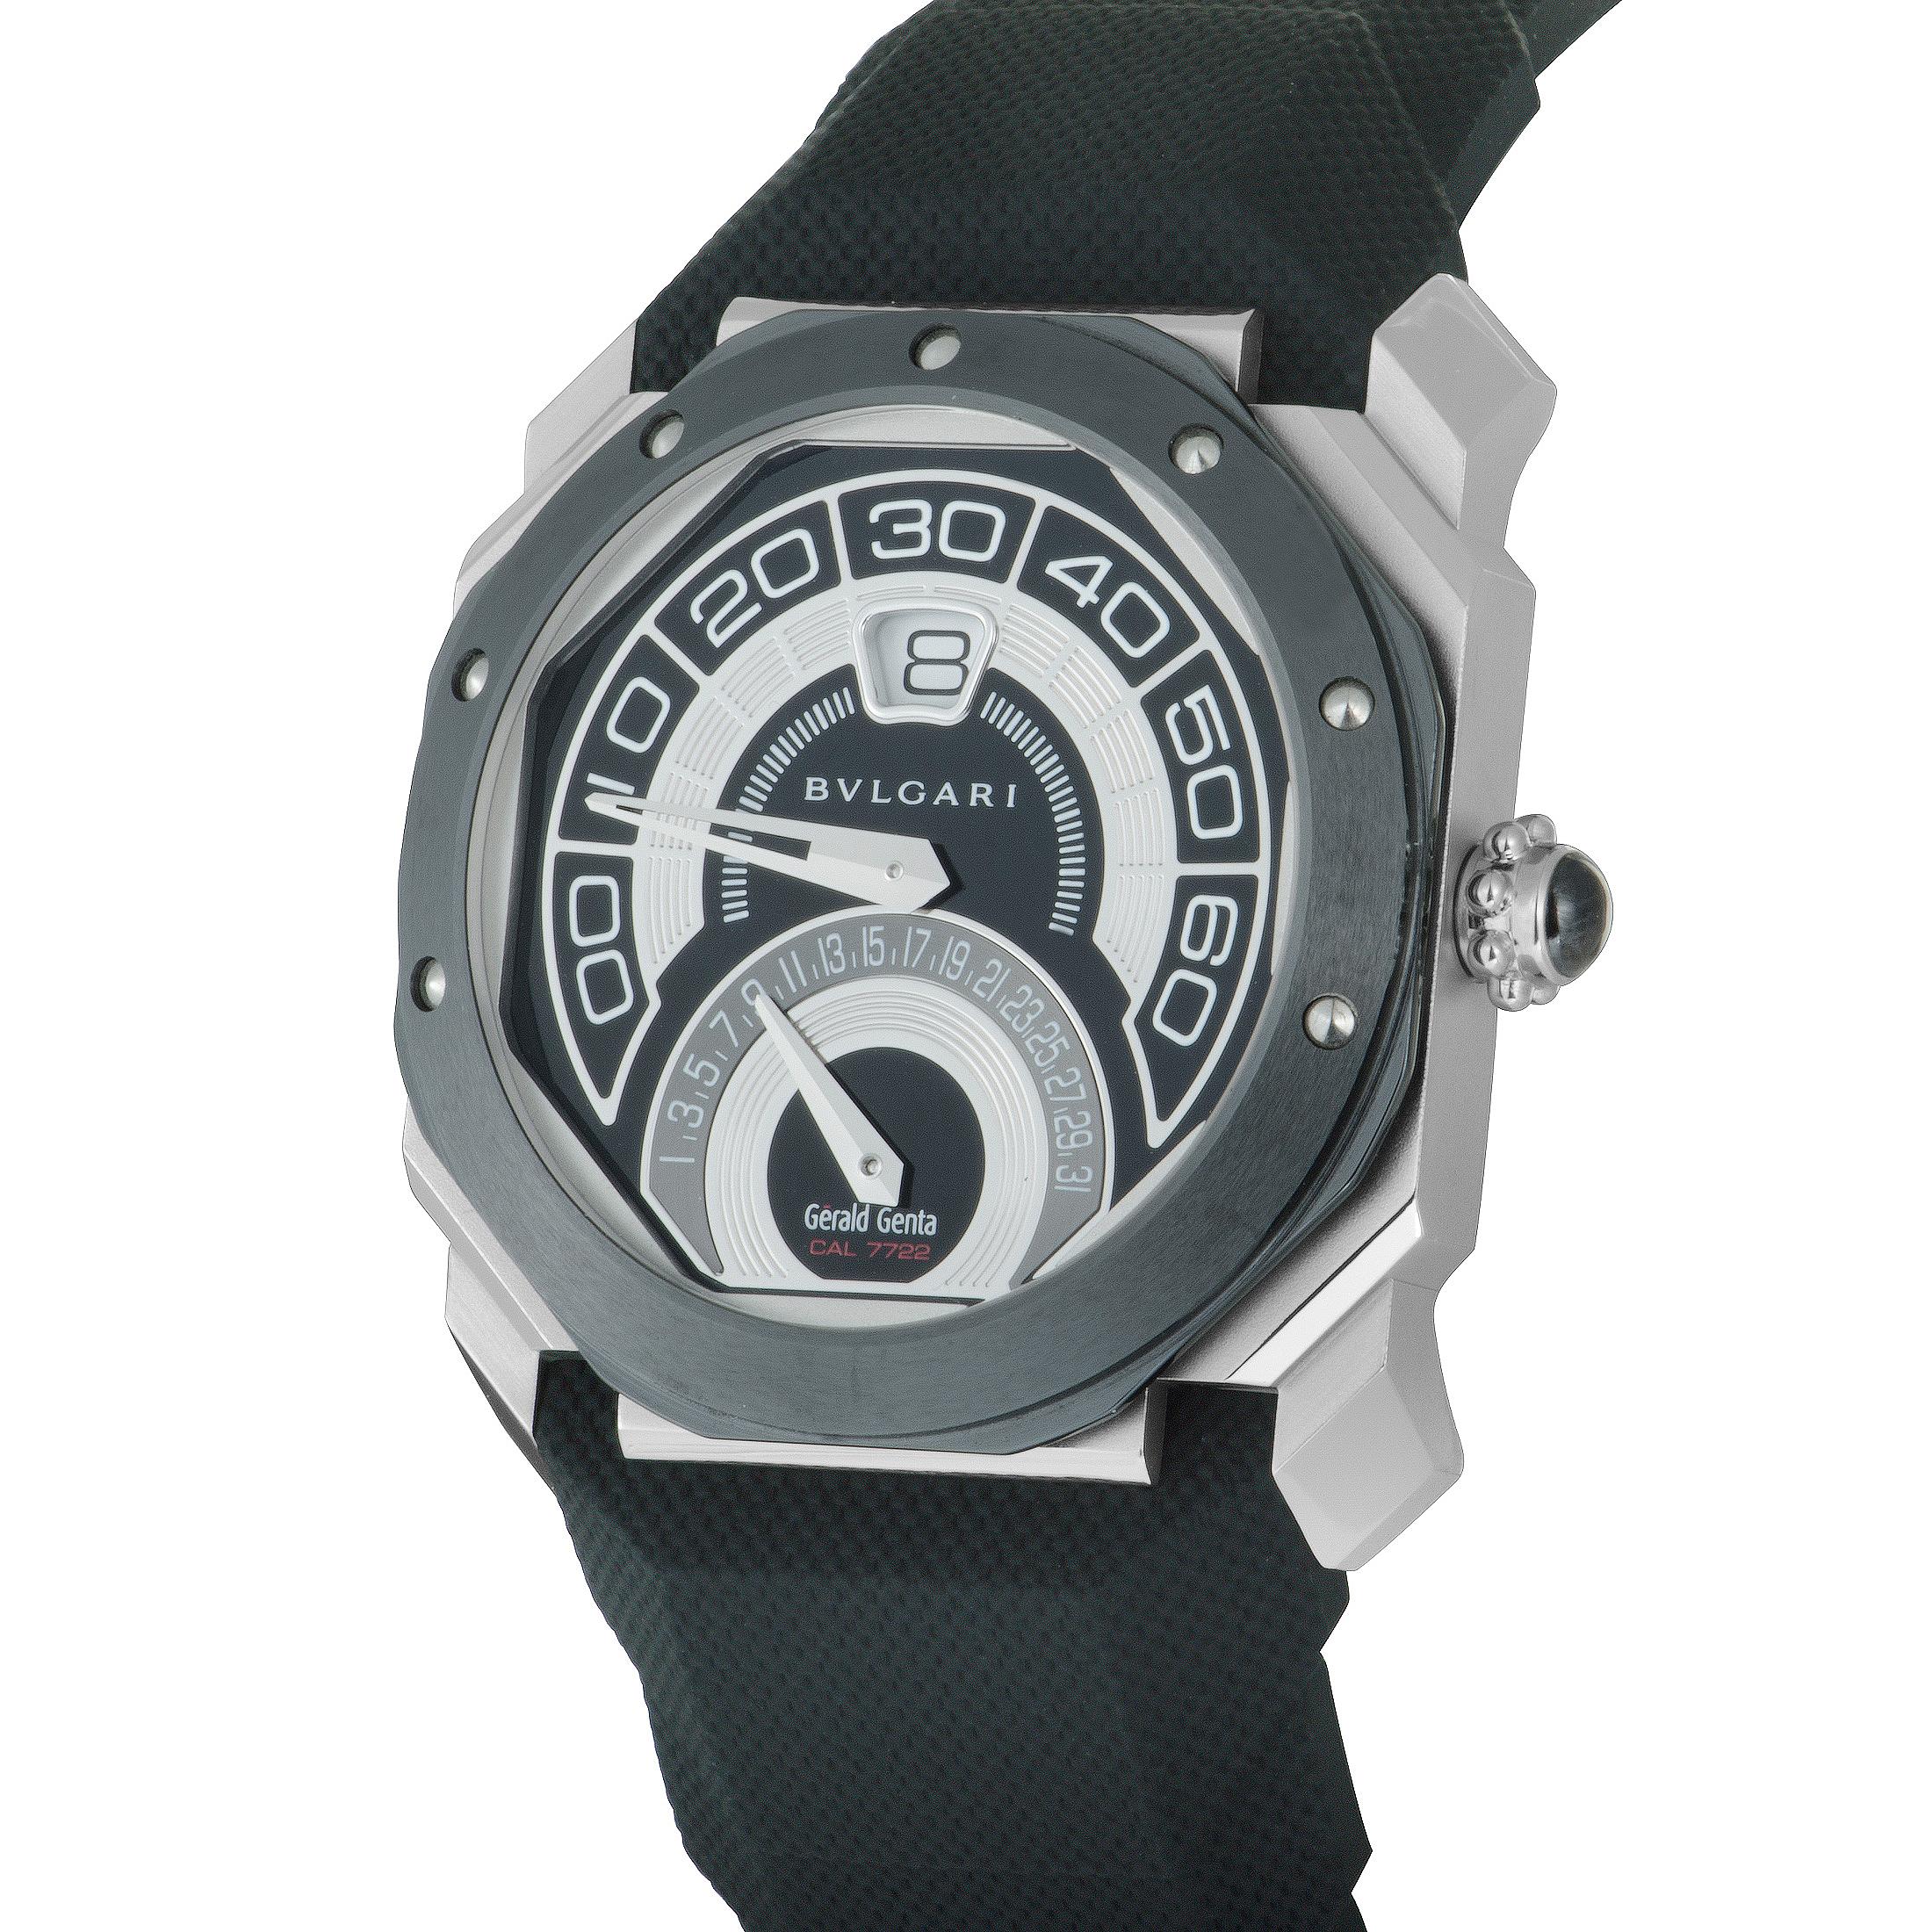 This is the Bvlgari Octo Retrogradi, reference number 101831.

It boasts a 43 mm case that is made of stainless steel and fitted with a black ceramic bezel. The case has see-through back and is mounted onto a black rubber strap, offering water